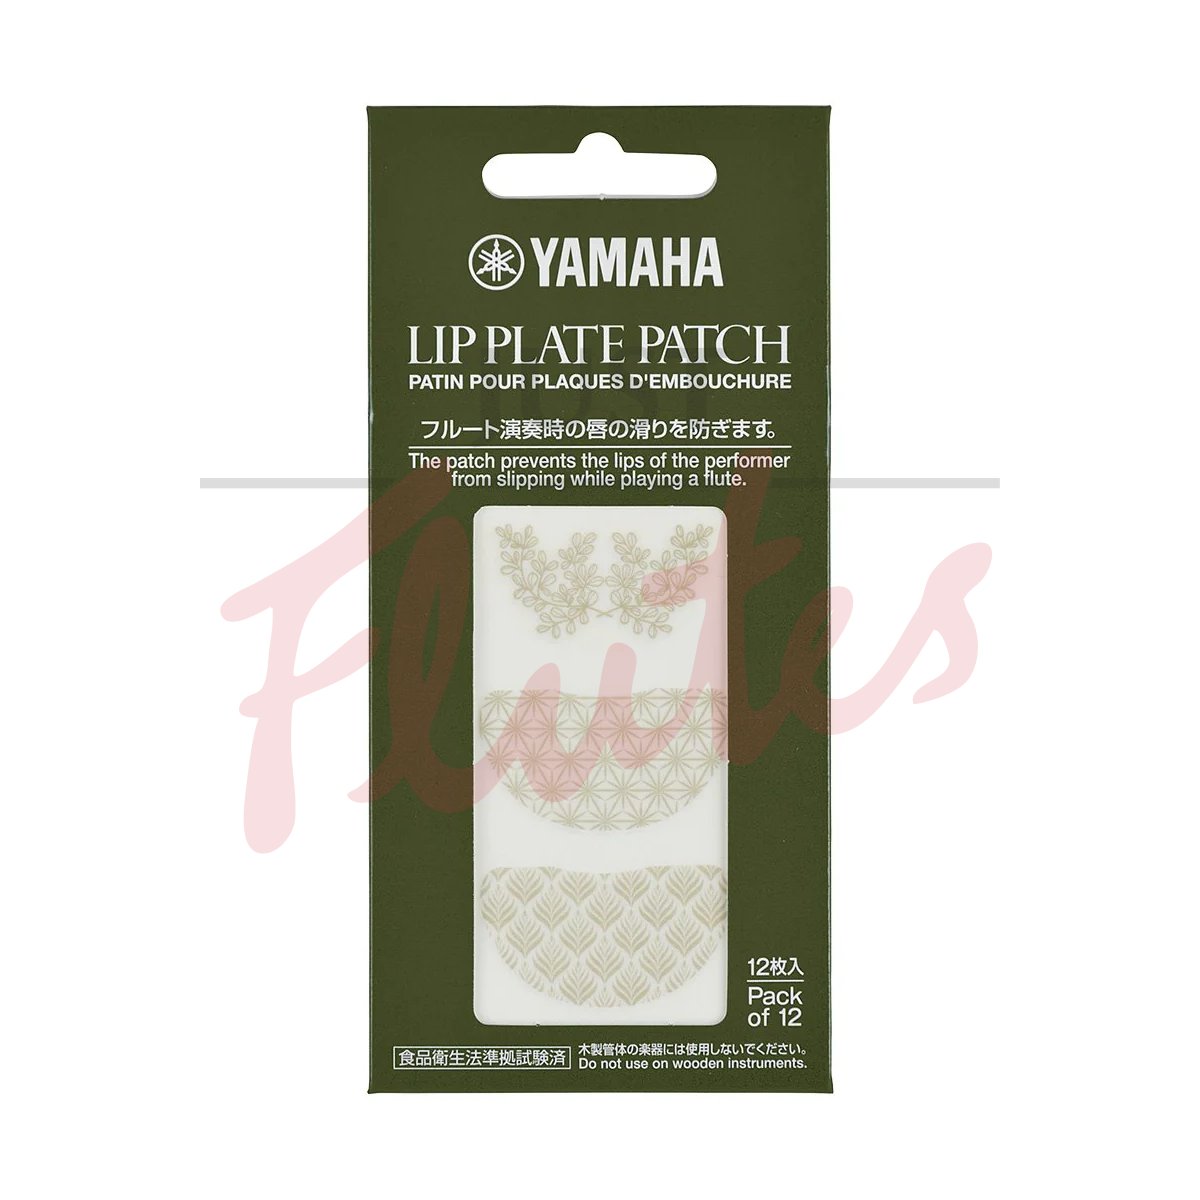 Yamaha FLLP2 Lip-Plate Patches, Pack of 12